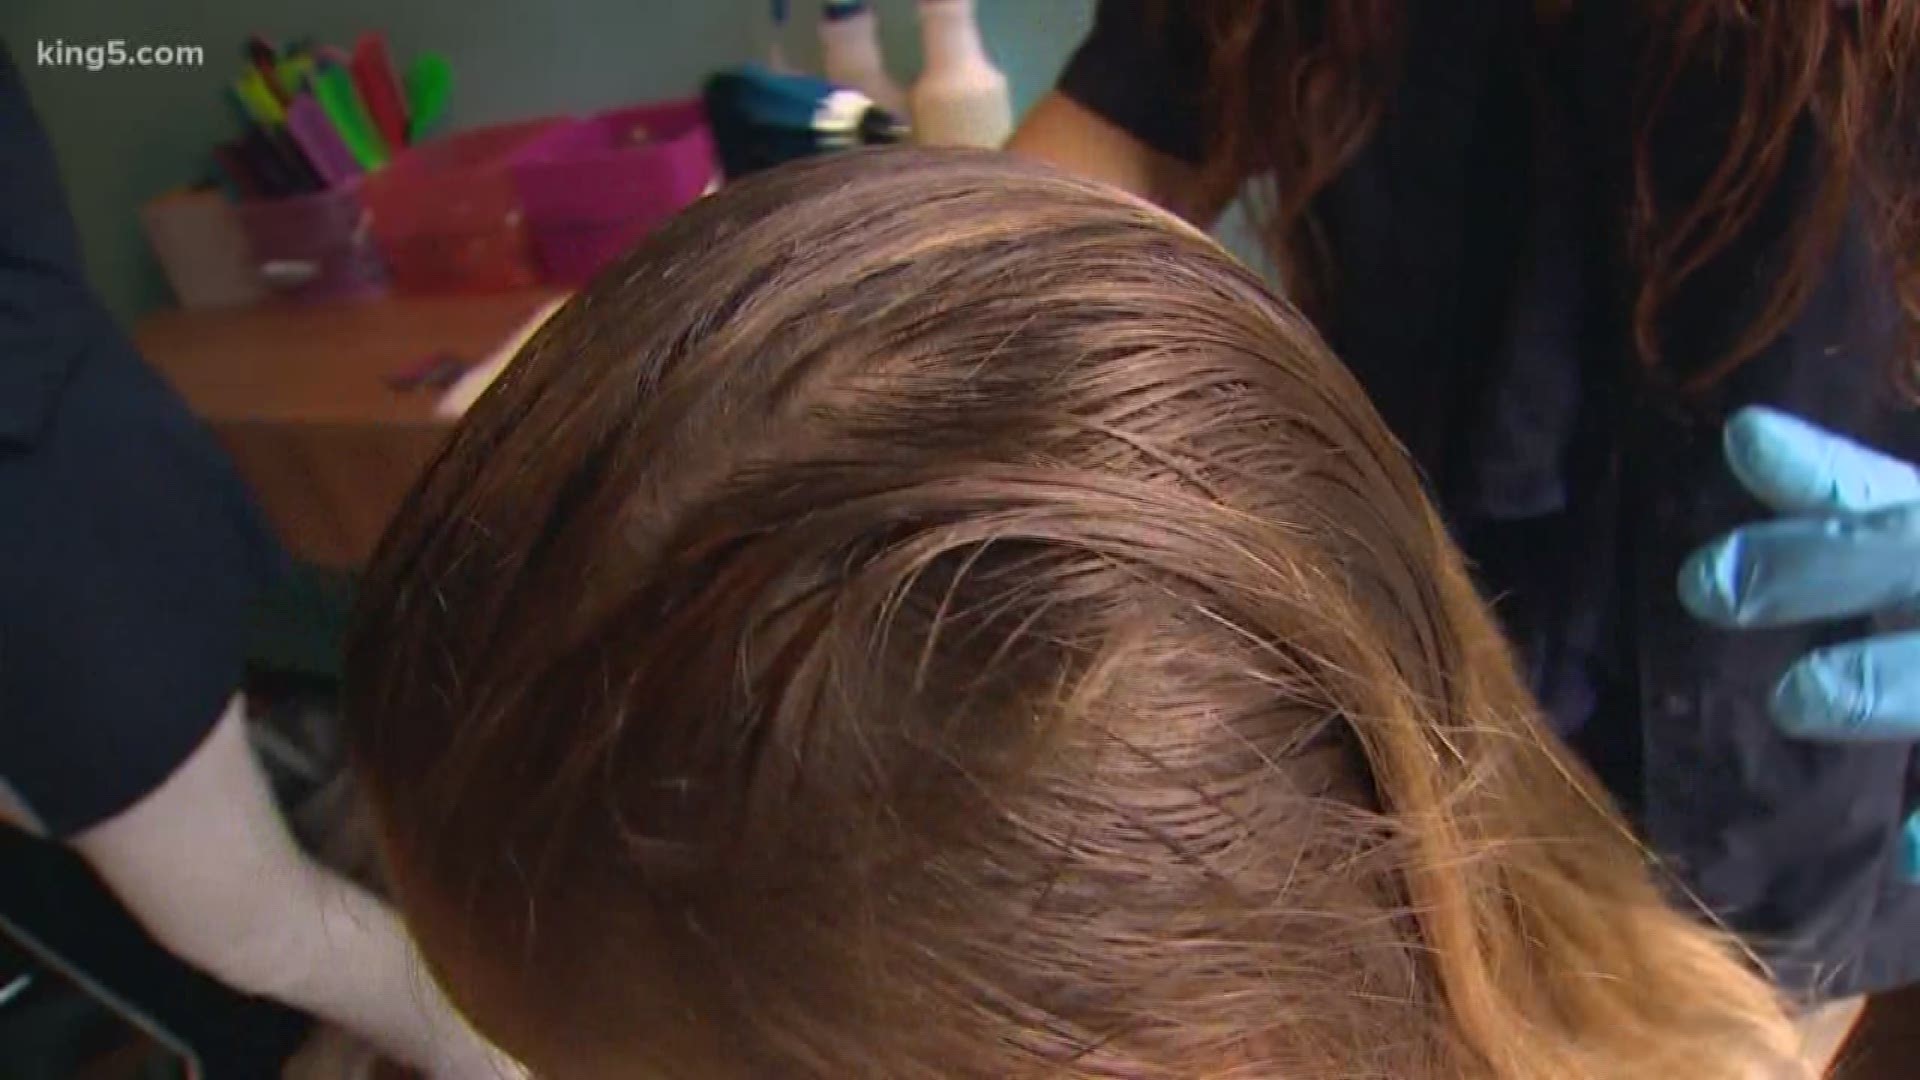 KING 5's Chris Cashman reports for Take 5 on the back-to-school worries over lice: 